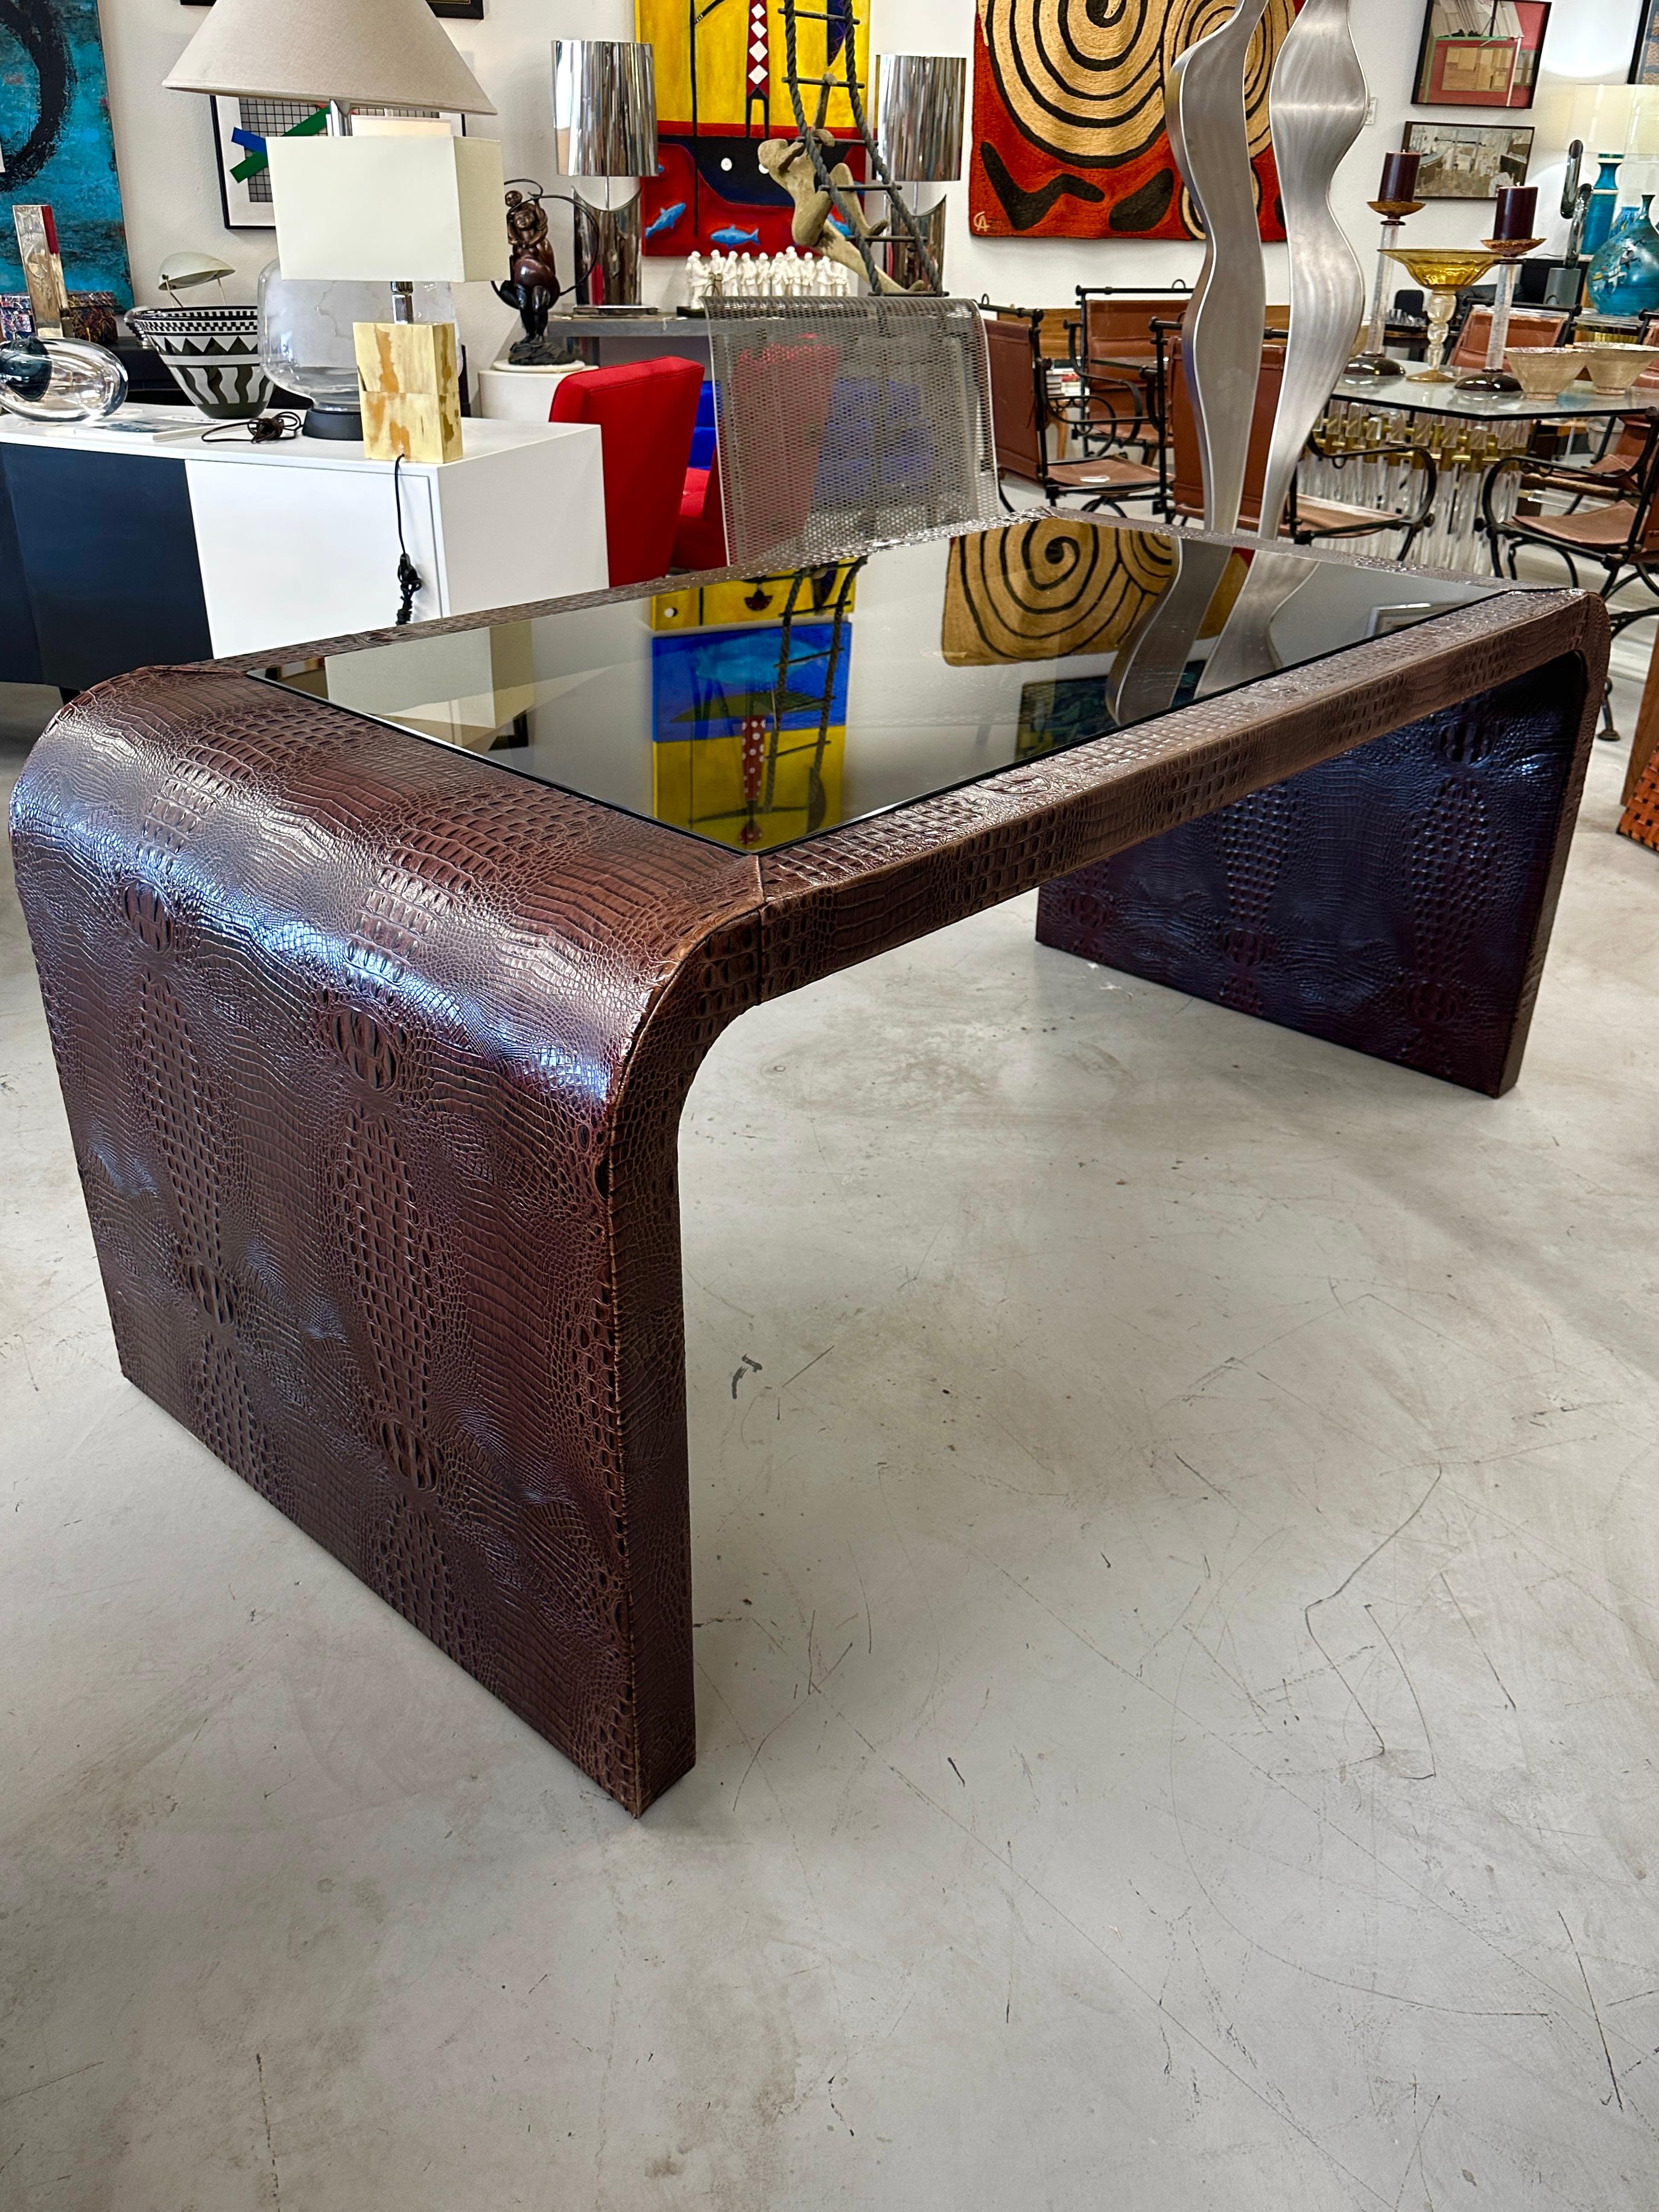 A stunning faux crocodile clad desk with a bronze glass inset. The leather is beautifully hand sewn on the desk and features striking graining. The clearance of the desk is 27.5 inches. It is pictured in our gallery with a Herman Miller Eames chair